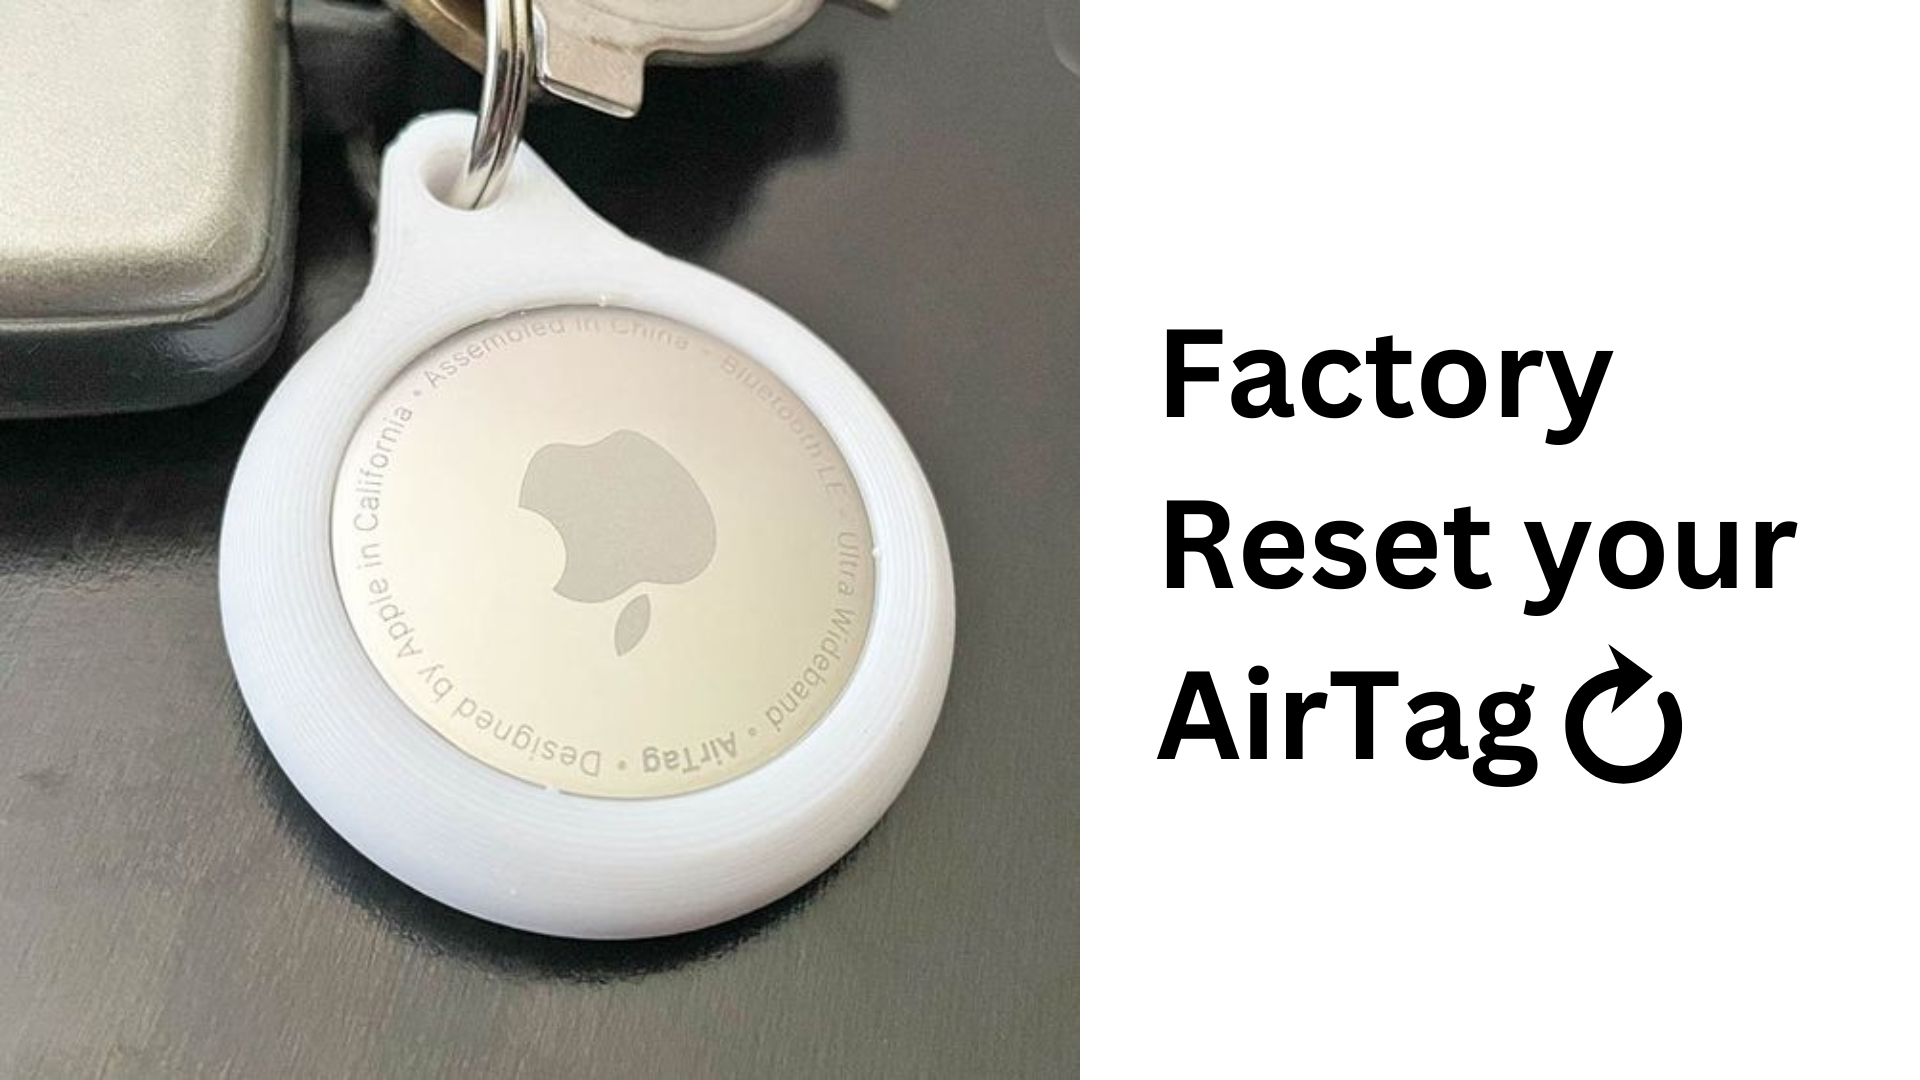 how to factory reset an AirTag